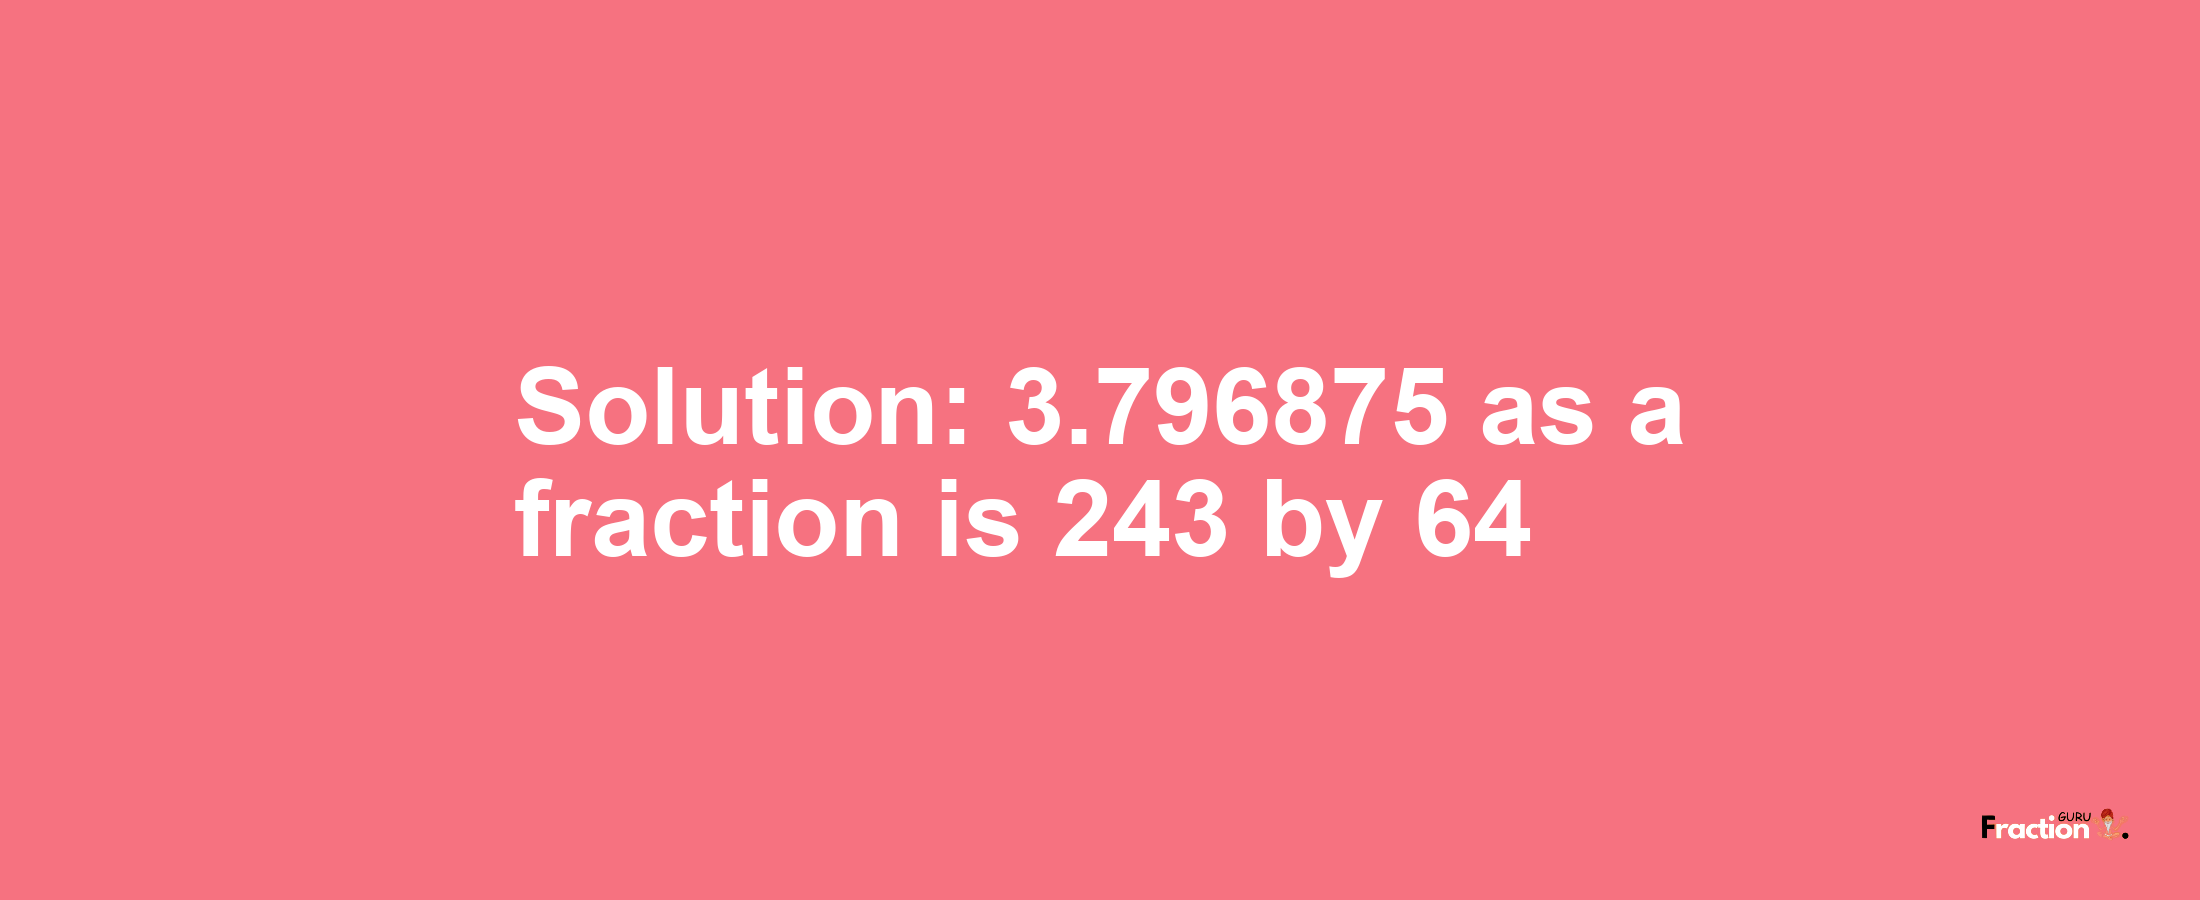 Solution:3.796875 as a fraction is 243/64